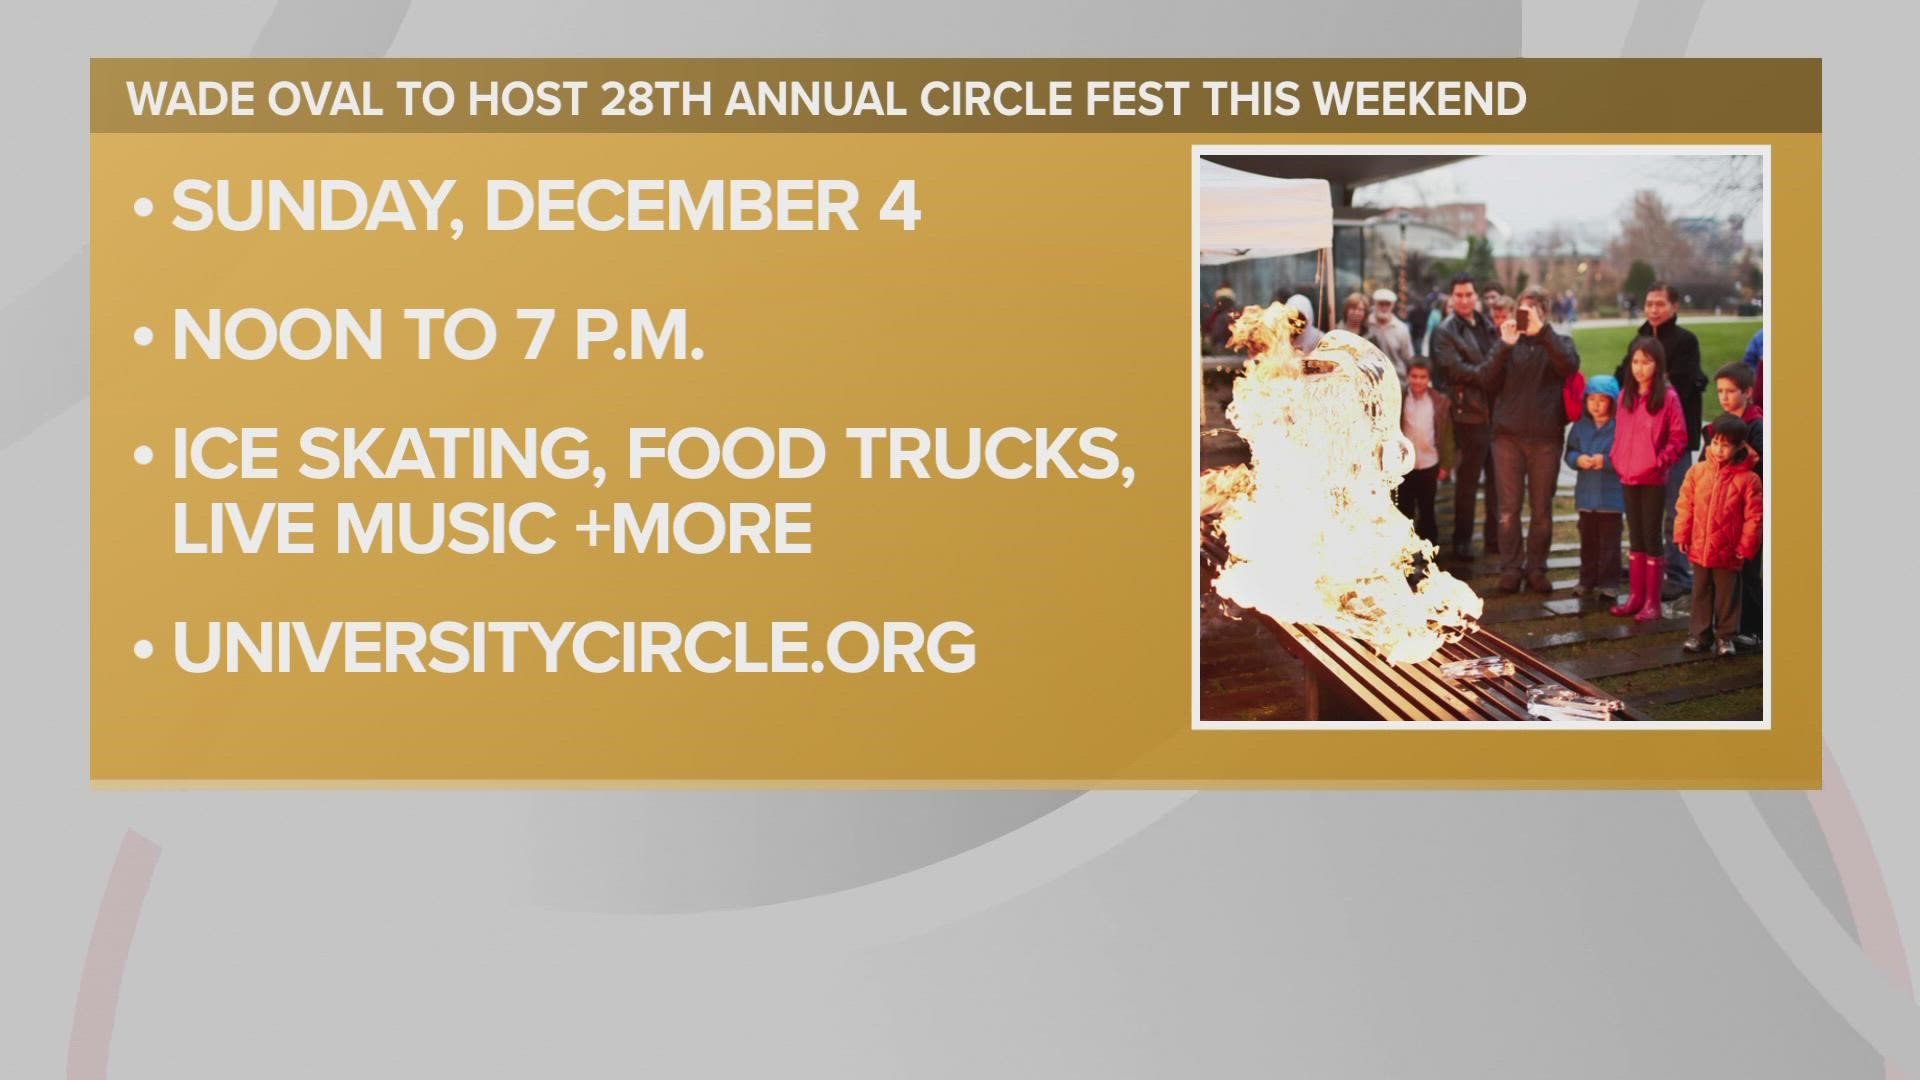 It's that time of year again! CircleFest is happening at Wade Oval in Cleveland on Sunday, Dec. 4, 2022.